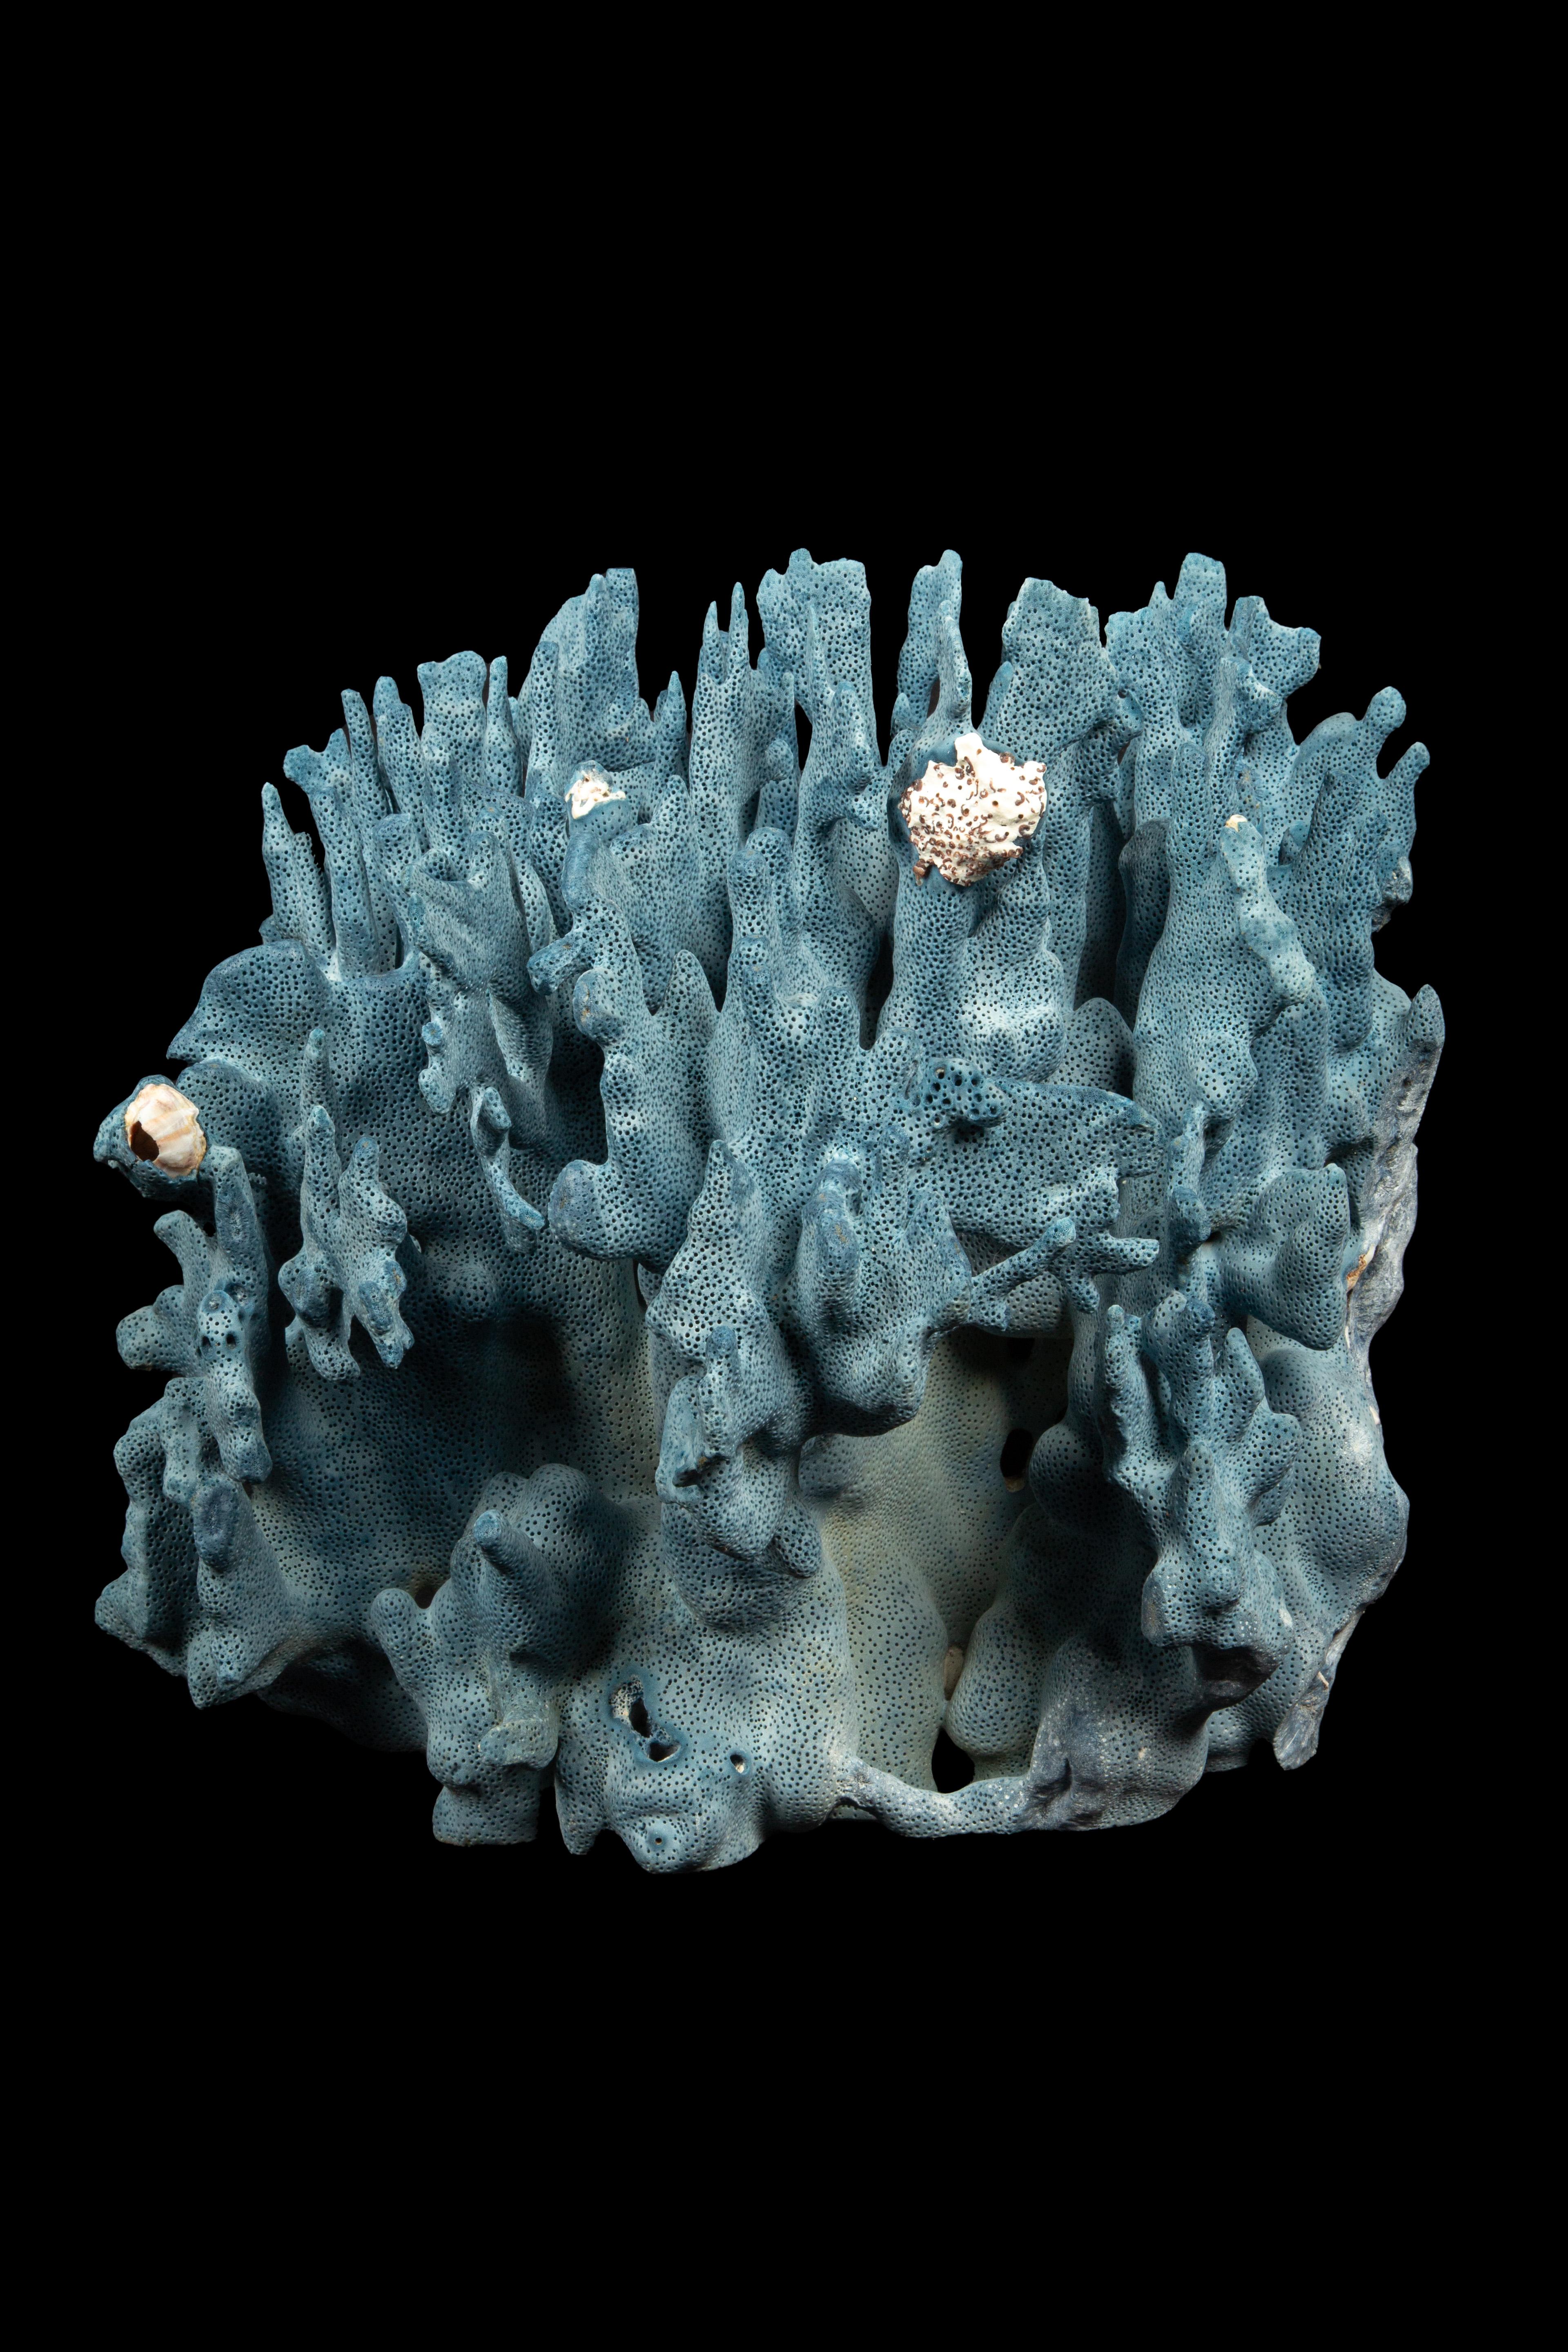 Large Natural Blue Coral Specimen. This extraordinary piece showcases the remarkable allure of the ocean with its stunning hues of vibrant blue. Immerse yourself in the intricate details and exquisite texture, meticulously crafted by nature itself.